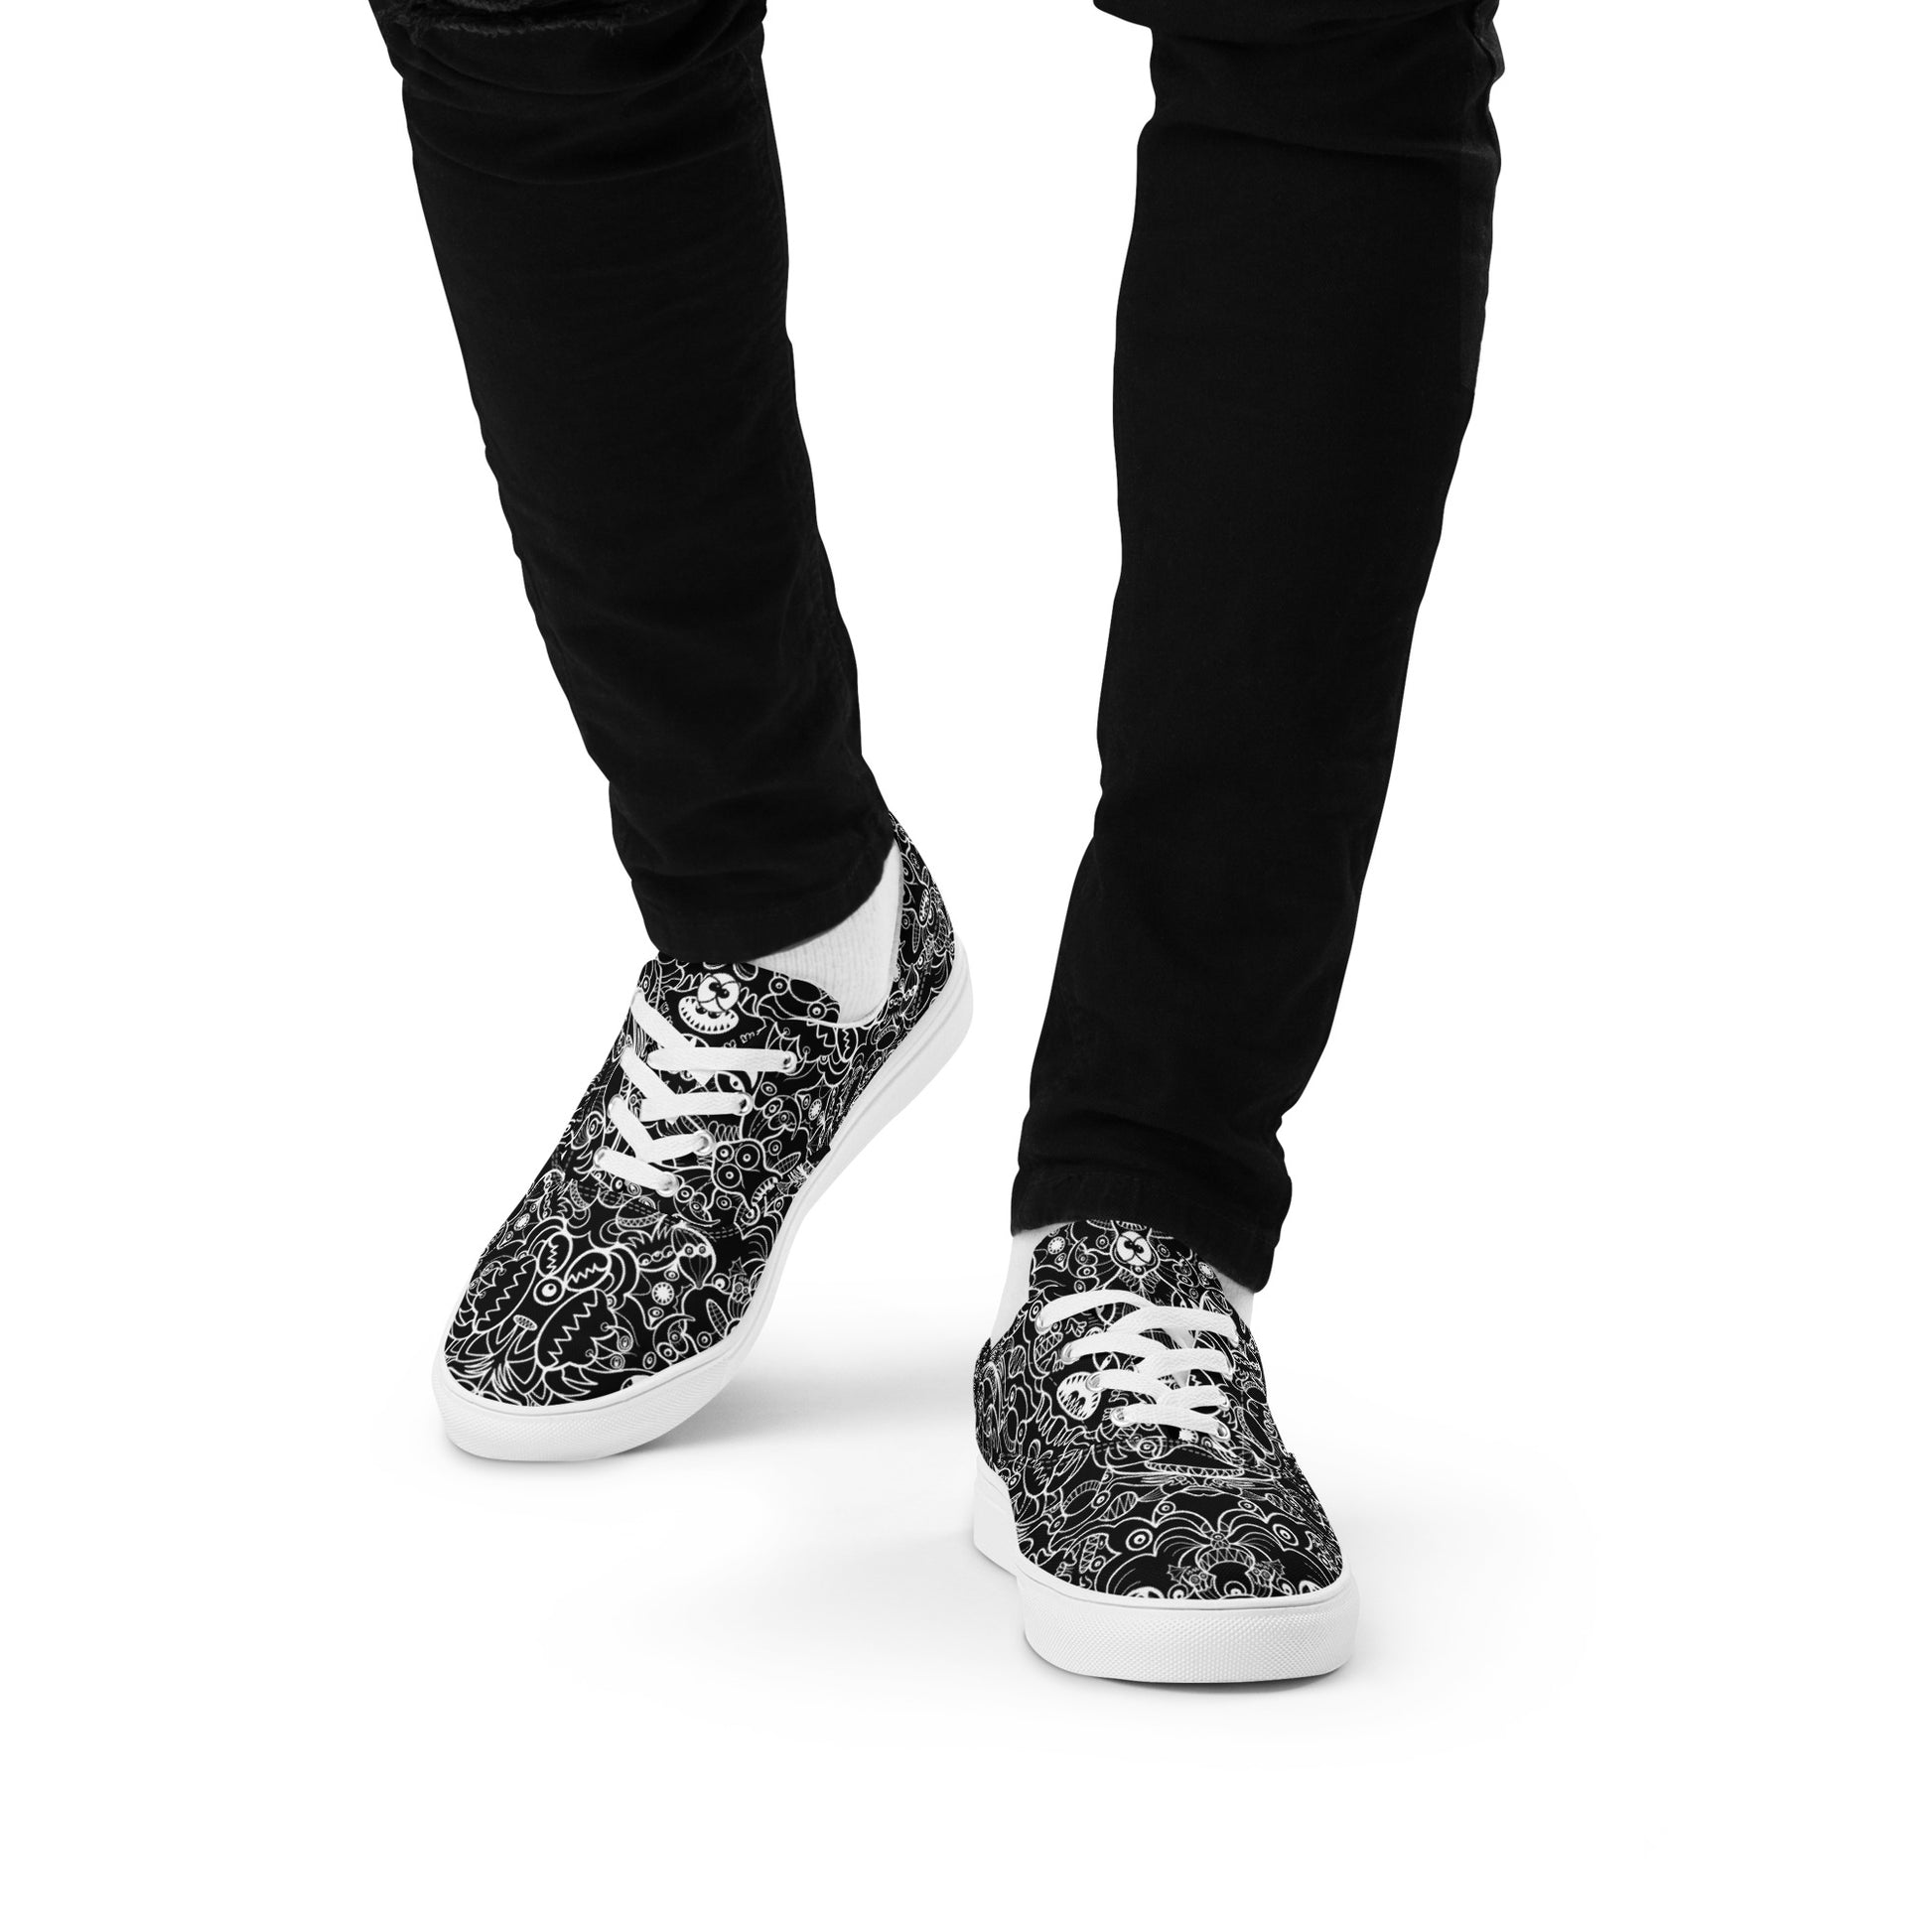 The powerful dark side of the Doodle world Men’s lace-up canvas shoes. Lifestyle